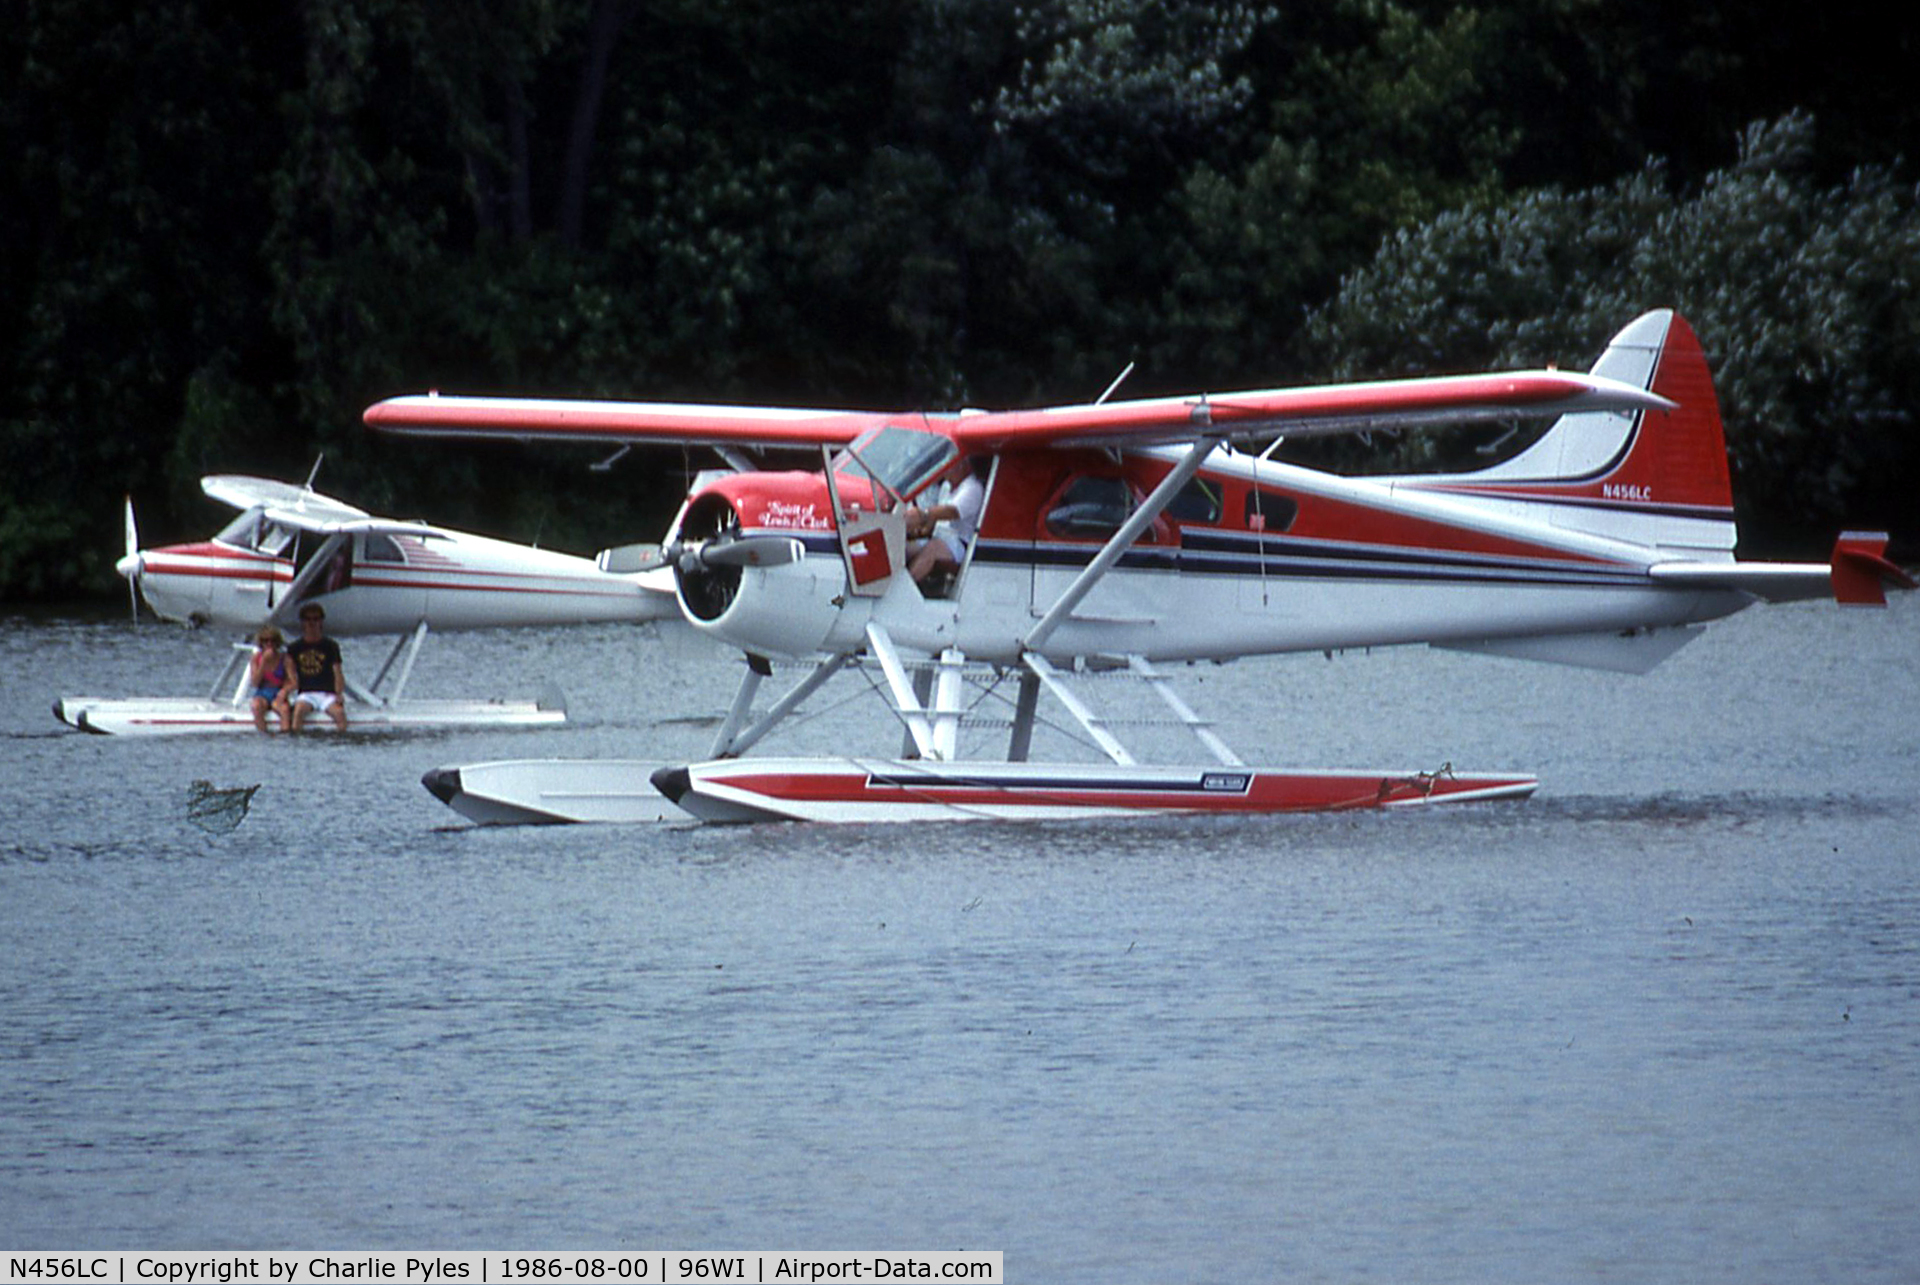 N456LC, De Havilland Canada DHC-2 Beaver Mk.I (L20A) C/N 434, Spirit of can't make it out in long shot.